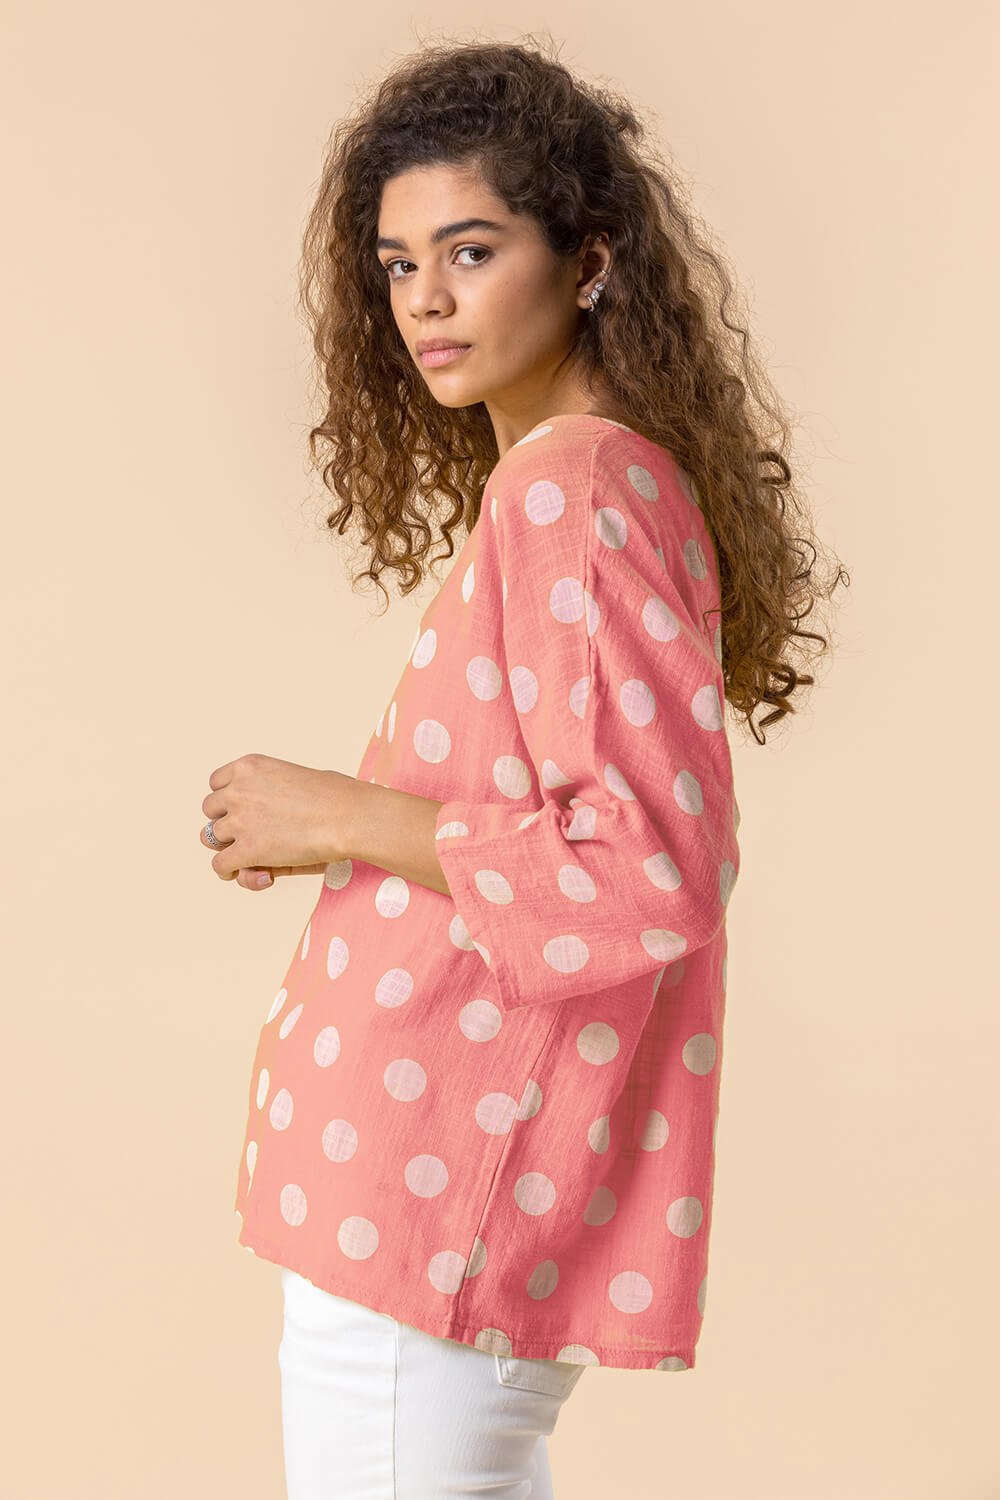 CORAL Spot Print 3/4 Sleeve Top, Image 4 of 4